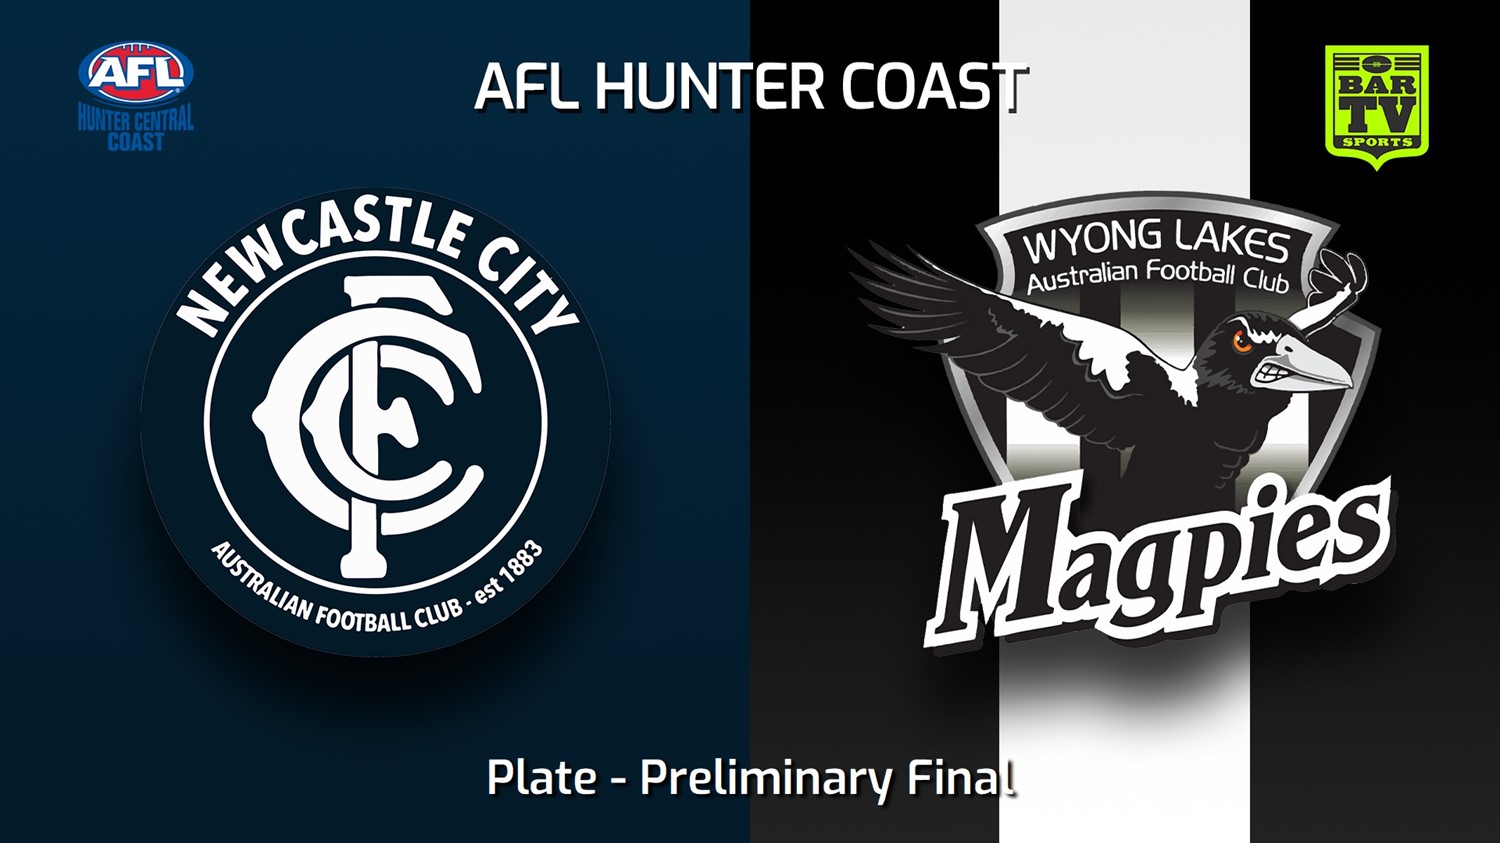 230909-AFL Hunter Central Coast Preliminary Final - Plate - Newcastle City  v Wyong Lakes Magpies Minigame Slate Image